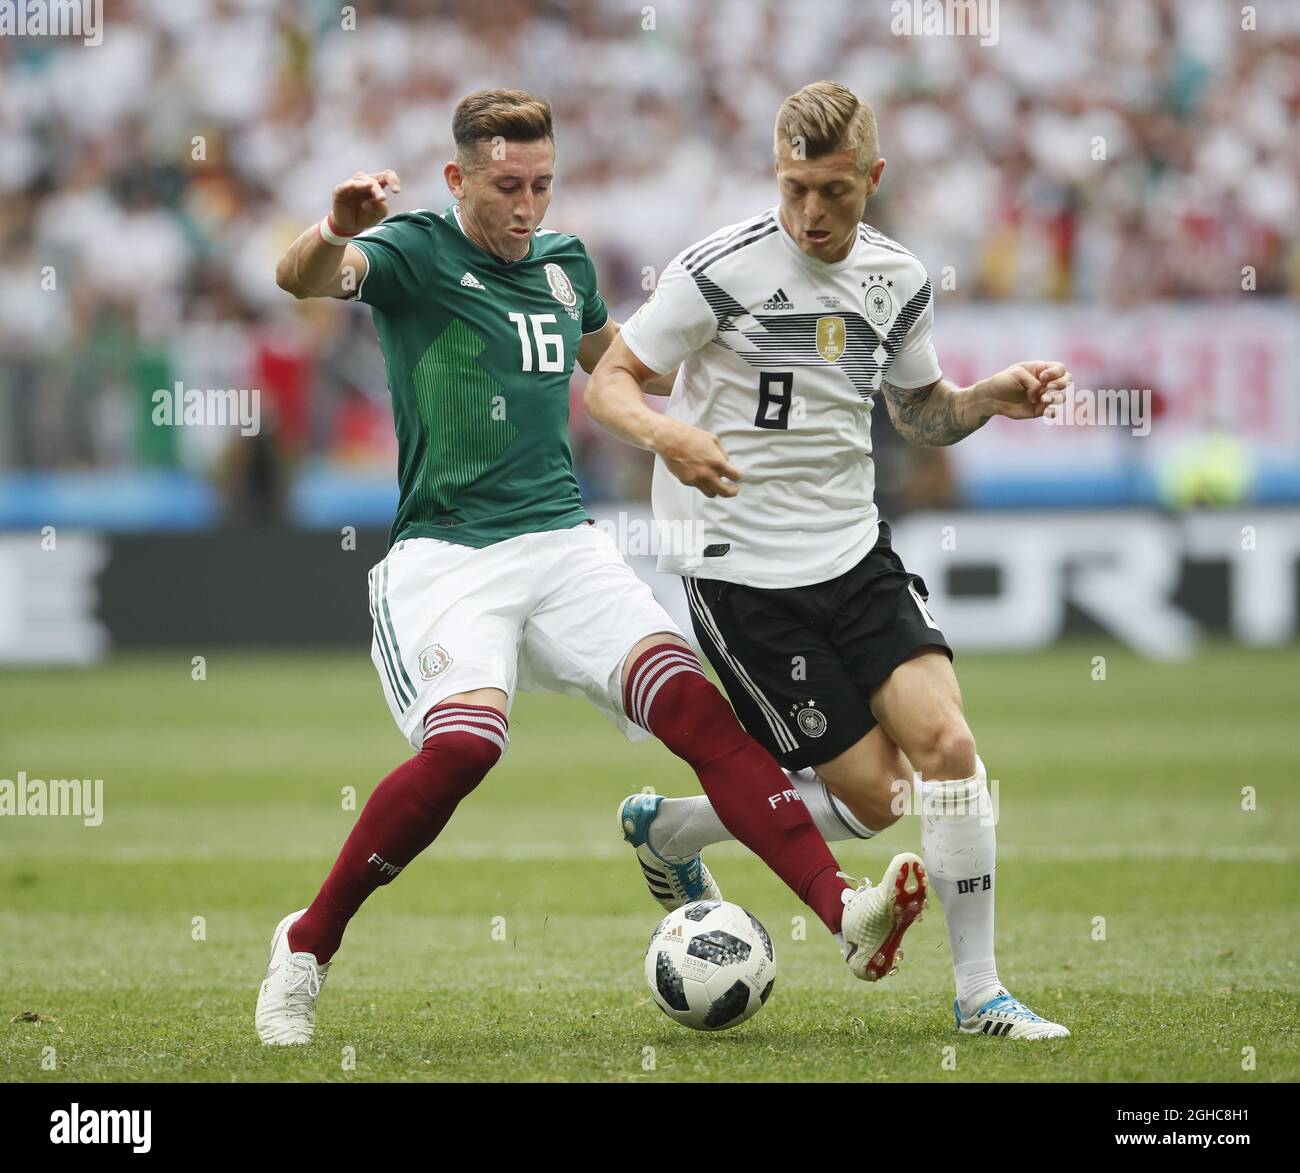 Hector Herrera of Mexico tackles Toni Kroos of Germany during the FIFA World Cup 2018 Group F match at the Luzhniki Stadium, Moscow. Picture date 17th June 2018. Picture credit should read: David Klein/Sportimage via PA Images Stock Photo